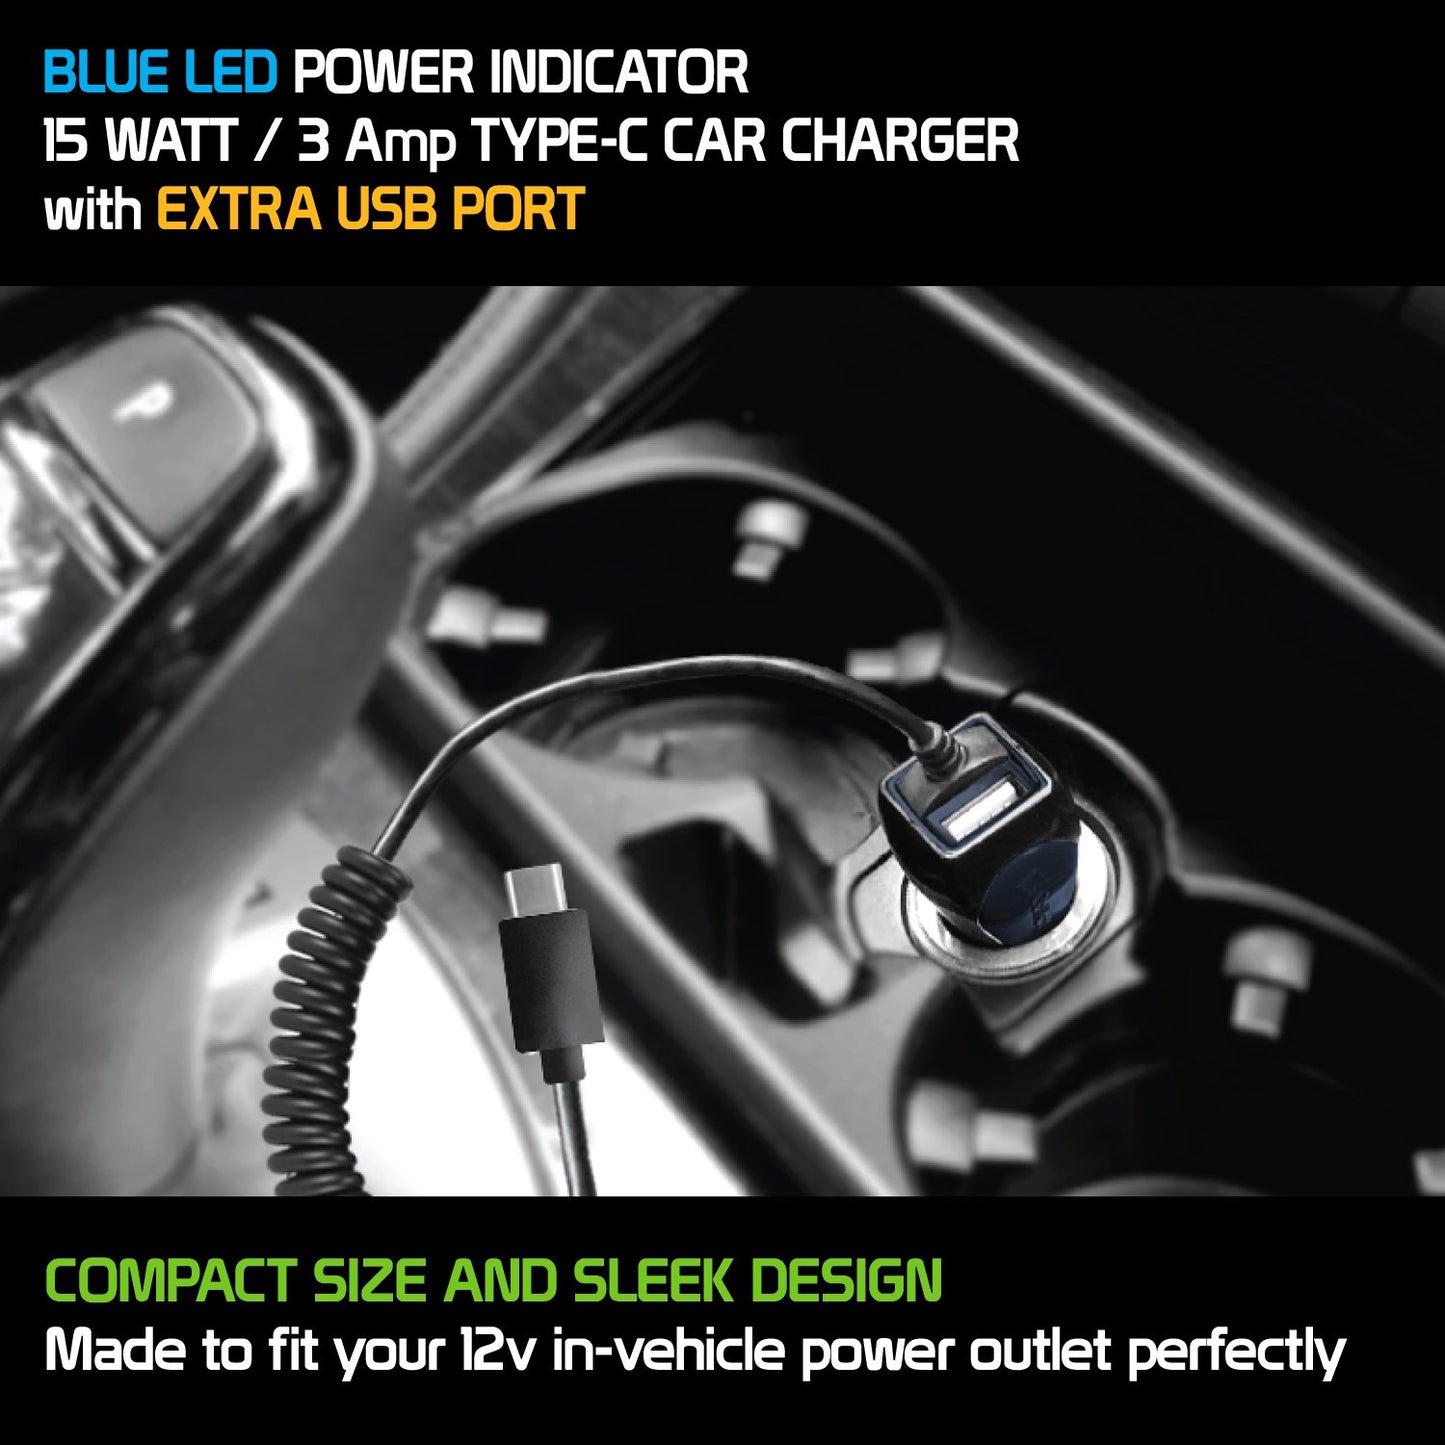 PUSBC32 - Cellet High Powered 3 Amp / 15 Watt Type-C USB Car Charger with Extra USB Port  & Attached 6ft coiled cable